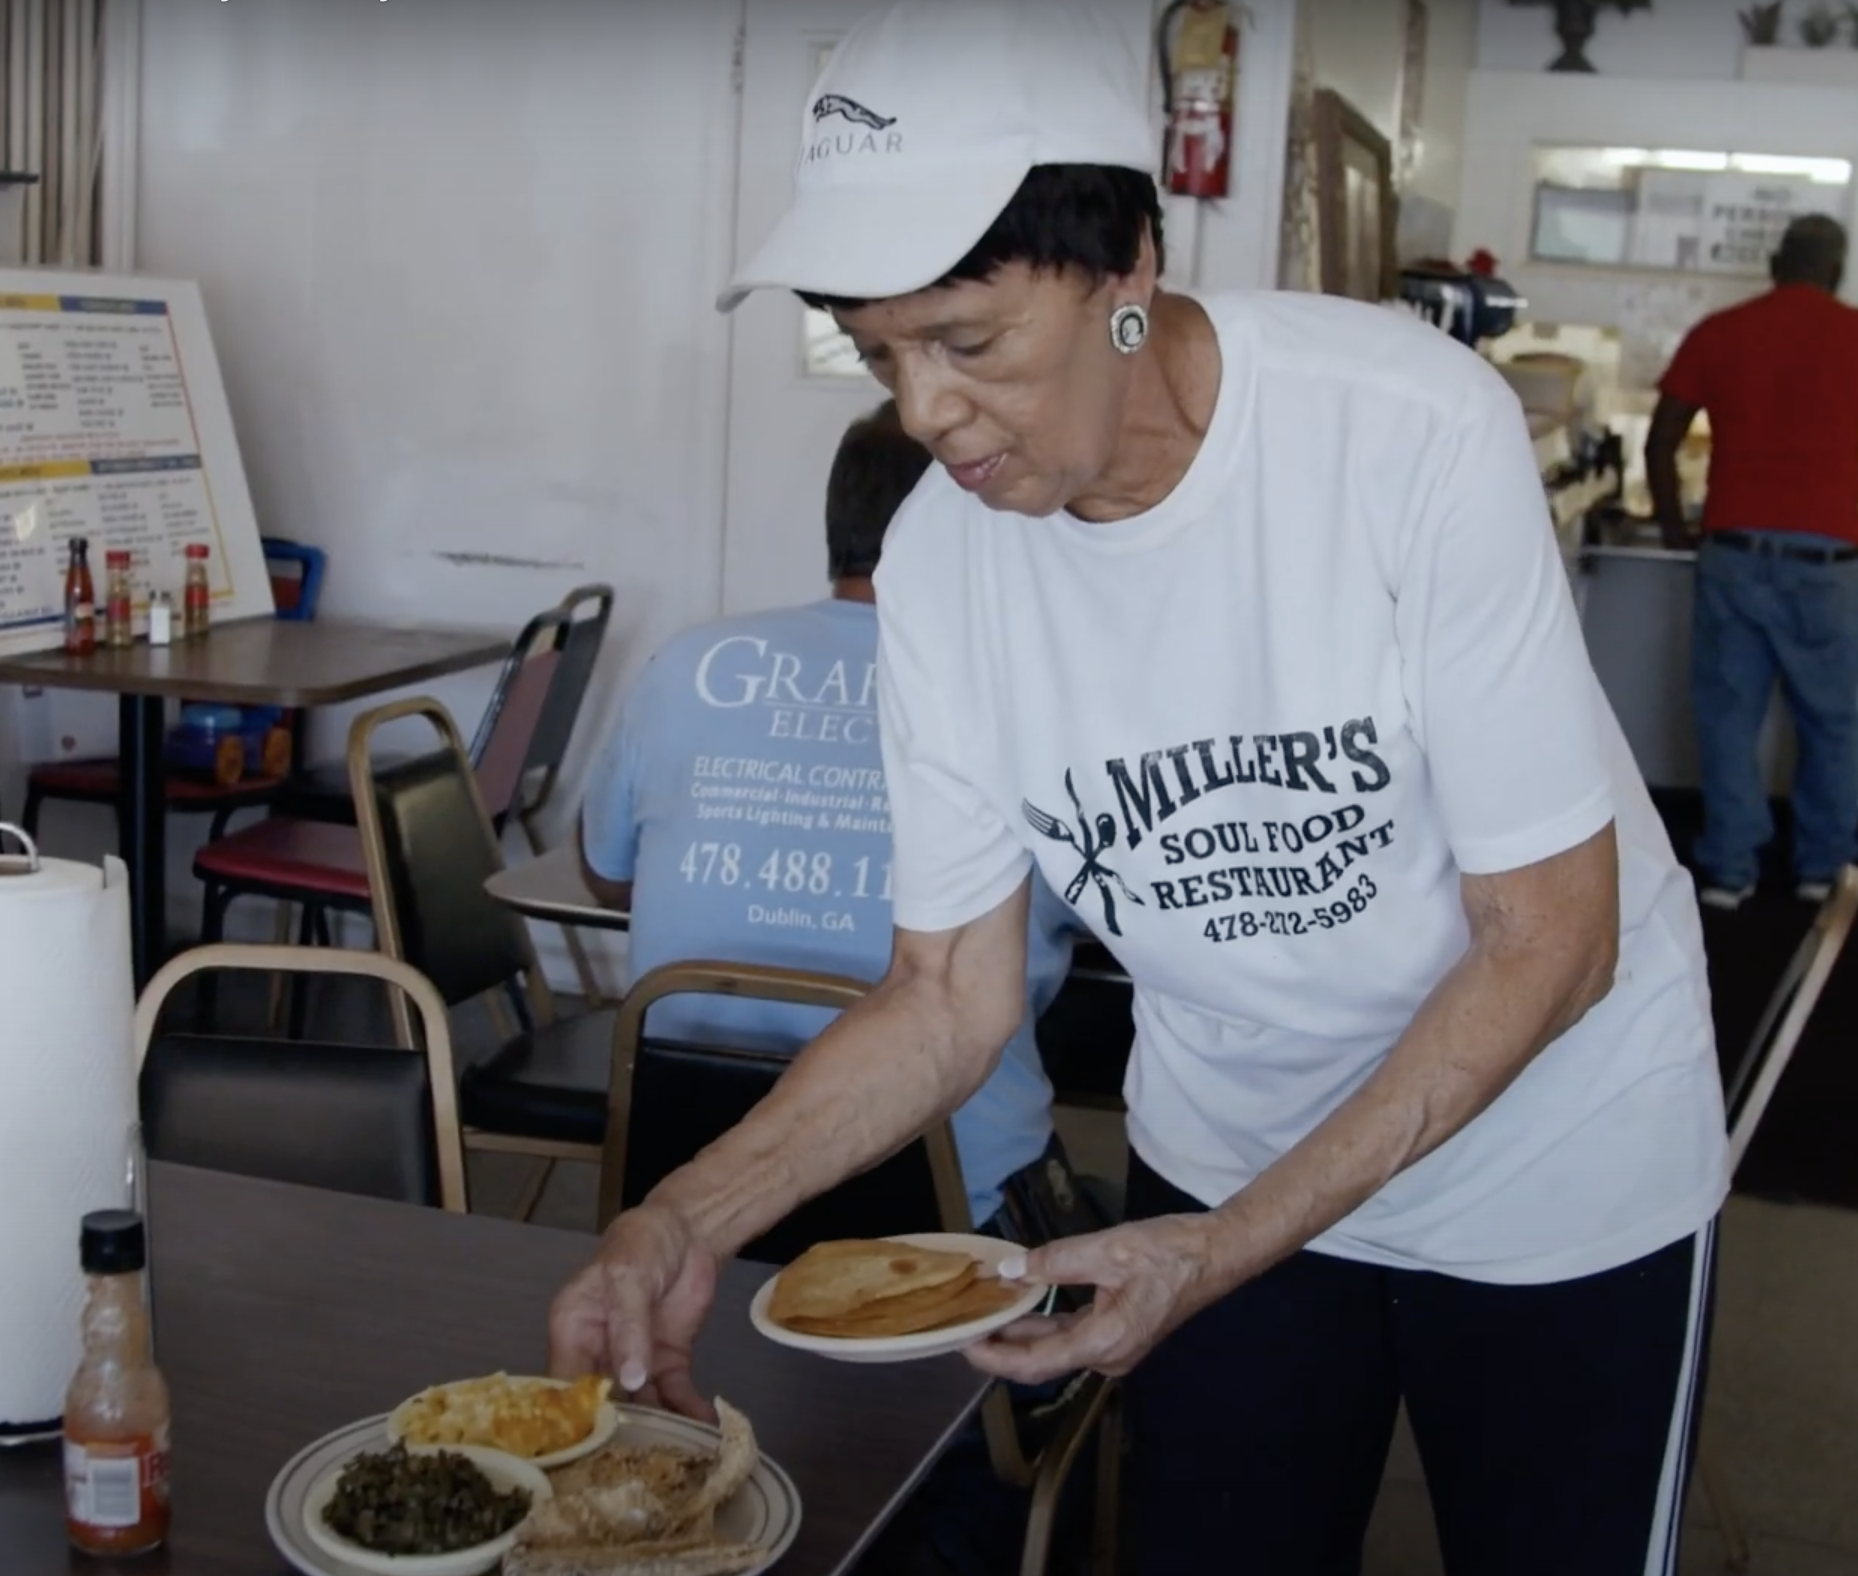 Miller’s Soul Food Grant Recipient from National Trust for Historic Preservation